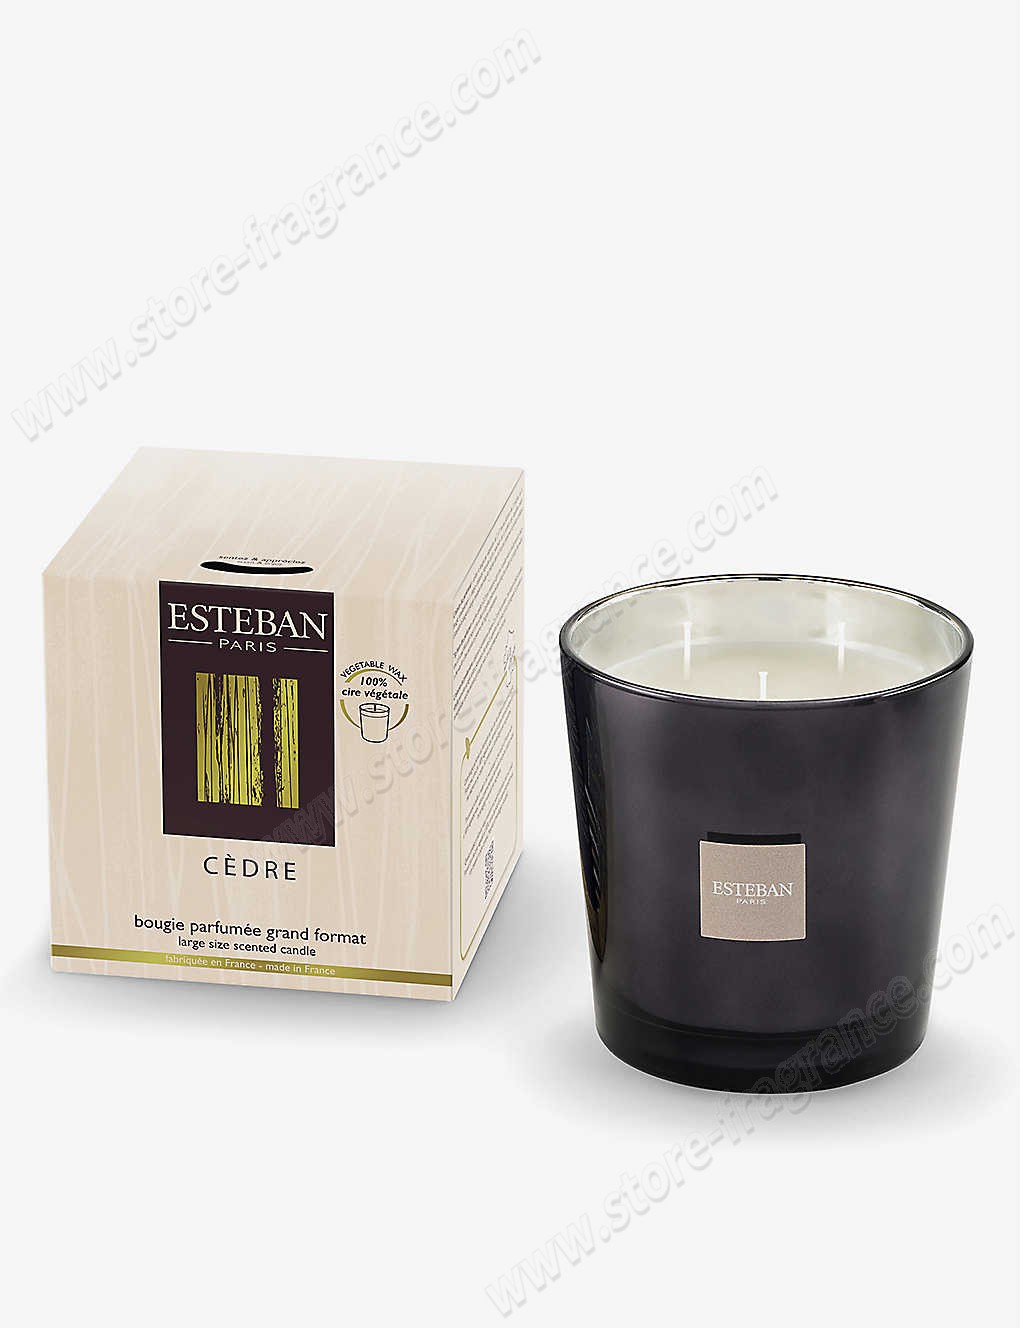 ESTEBAN/Cèdre three-wick scented candle 450g ✿ Discount Store - ESTEBAN/Cèdre three-wick scented candle 450g ✿ Discount Store